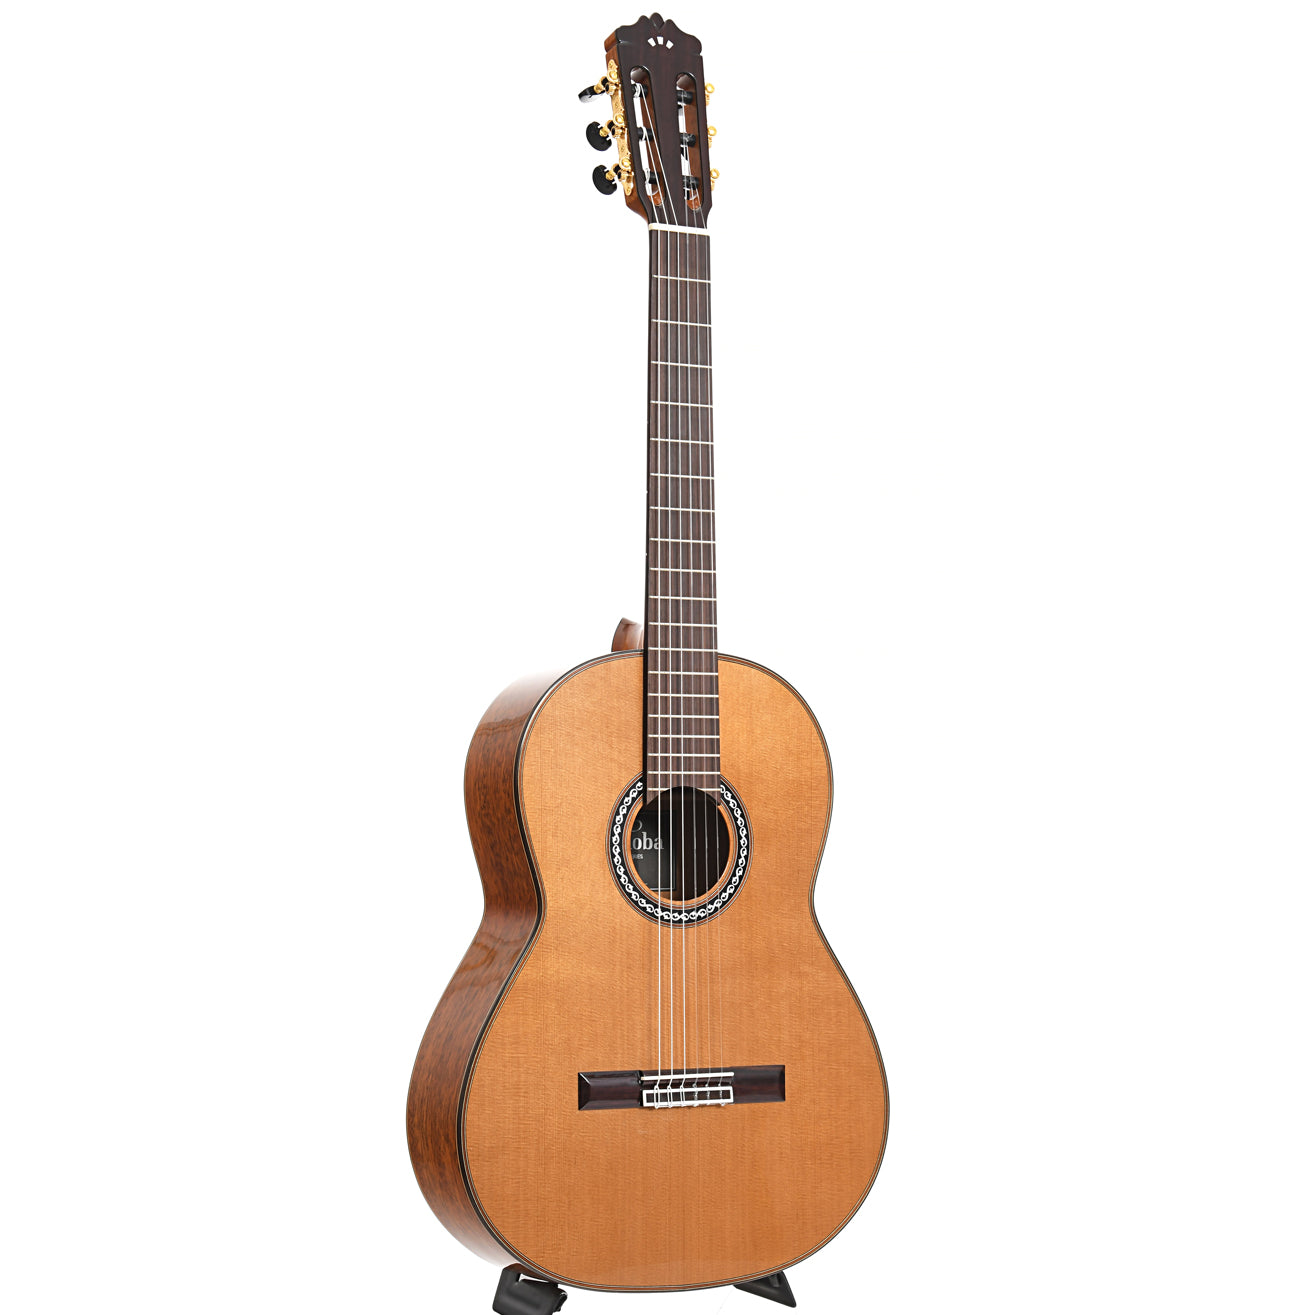 Image 3 of Cordoba C9 Parlor Classical Guitar and Case - SKU# CORC9D : Product Type Classical & Flamenco Guitars : Elderly Instruments